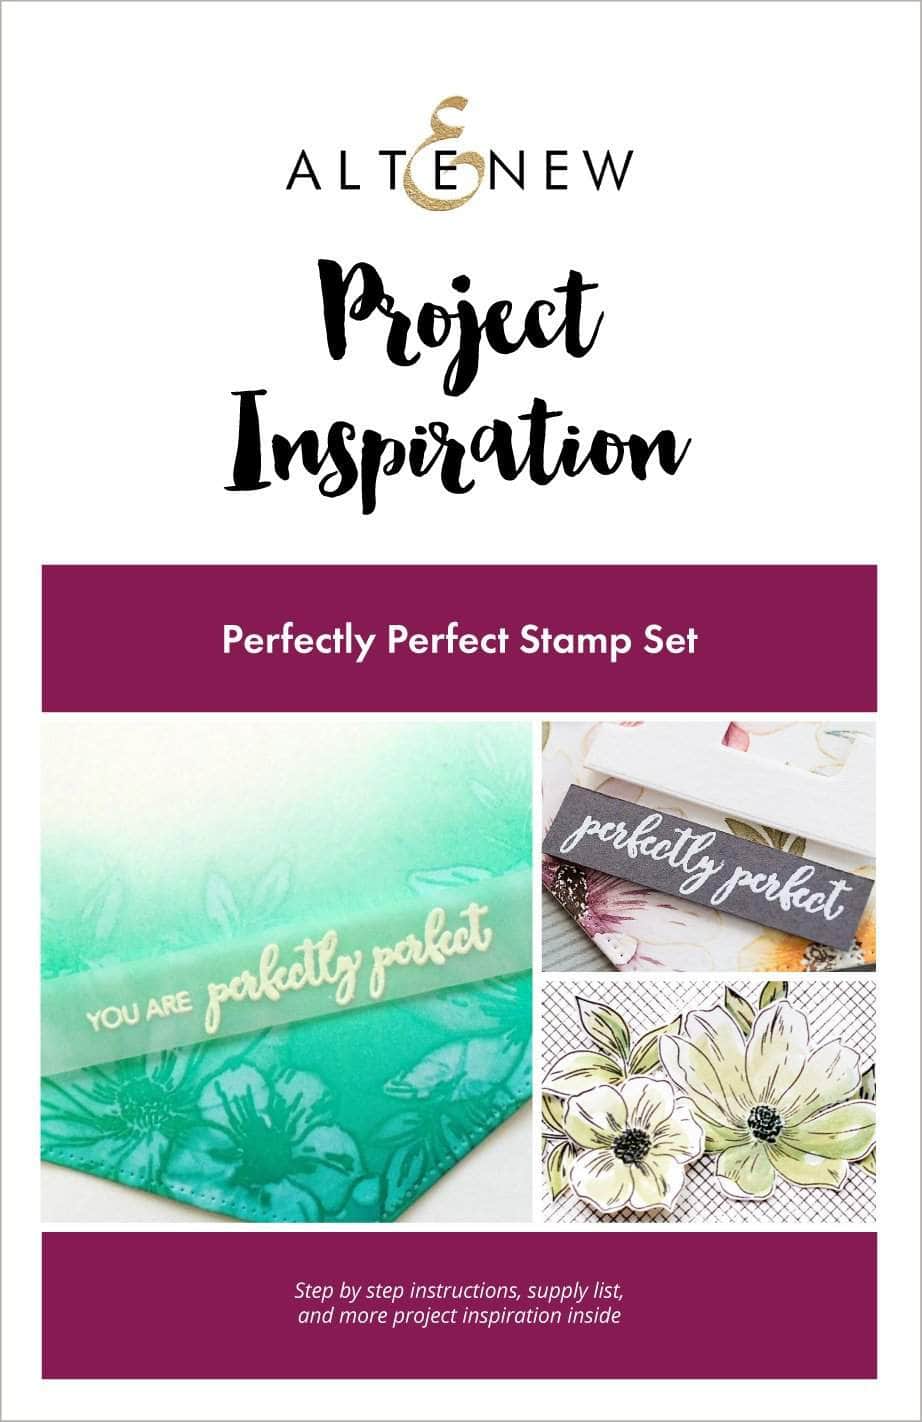 Printed Media Perfectly Perfect Project Inspiration Guide